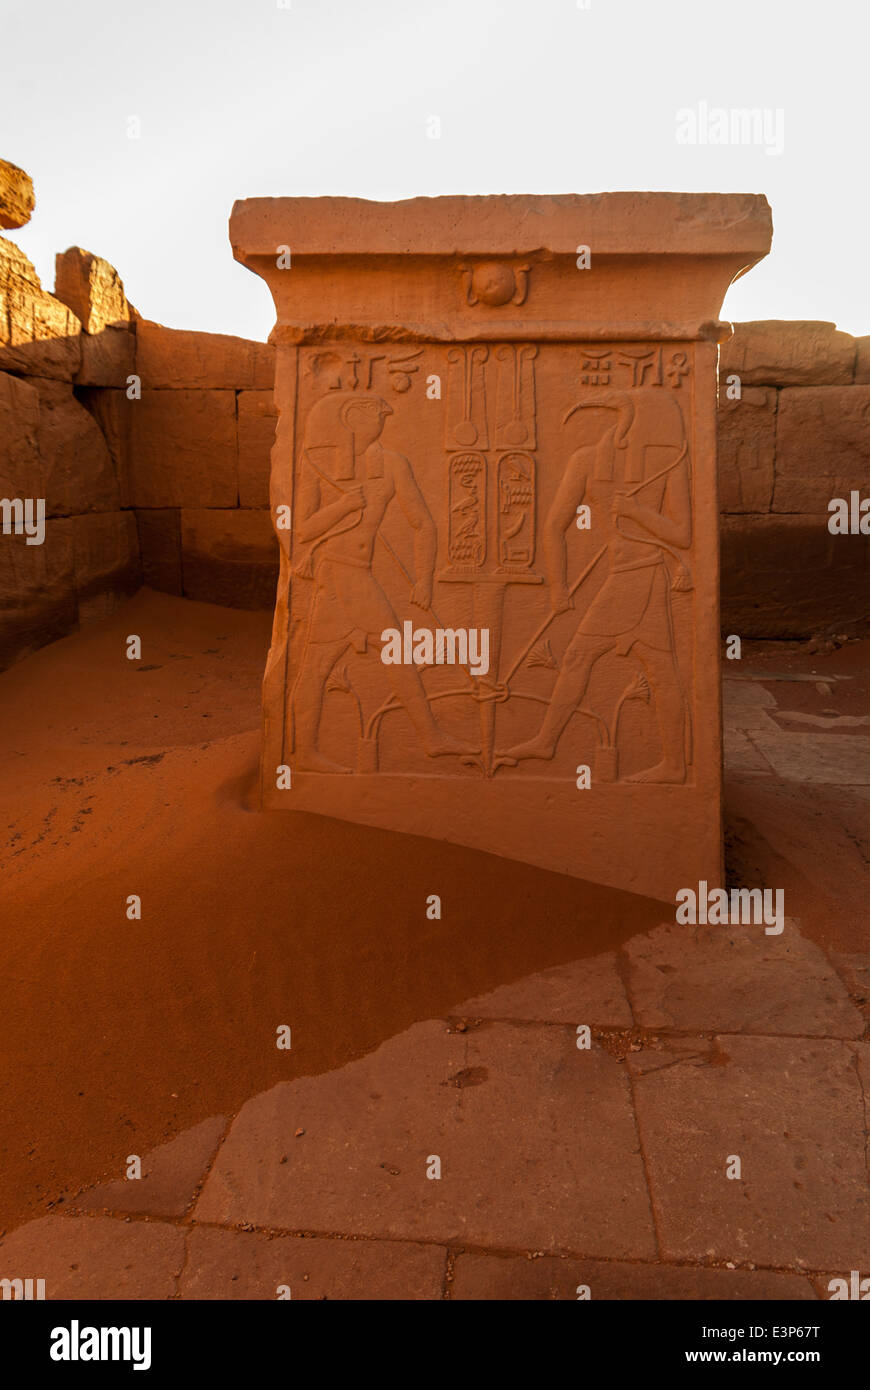 Copy of carved stone altar with reliefs depicting gods Horus and Thot, Amun Temple, Naqa, northern Sudan Stock Photo